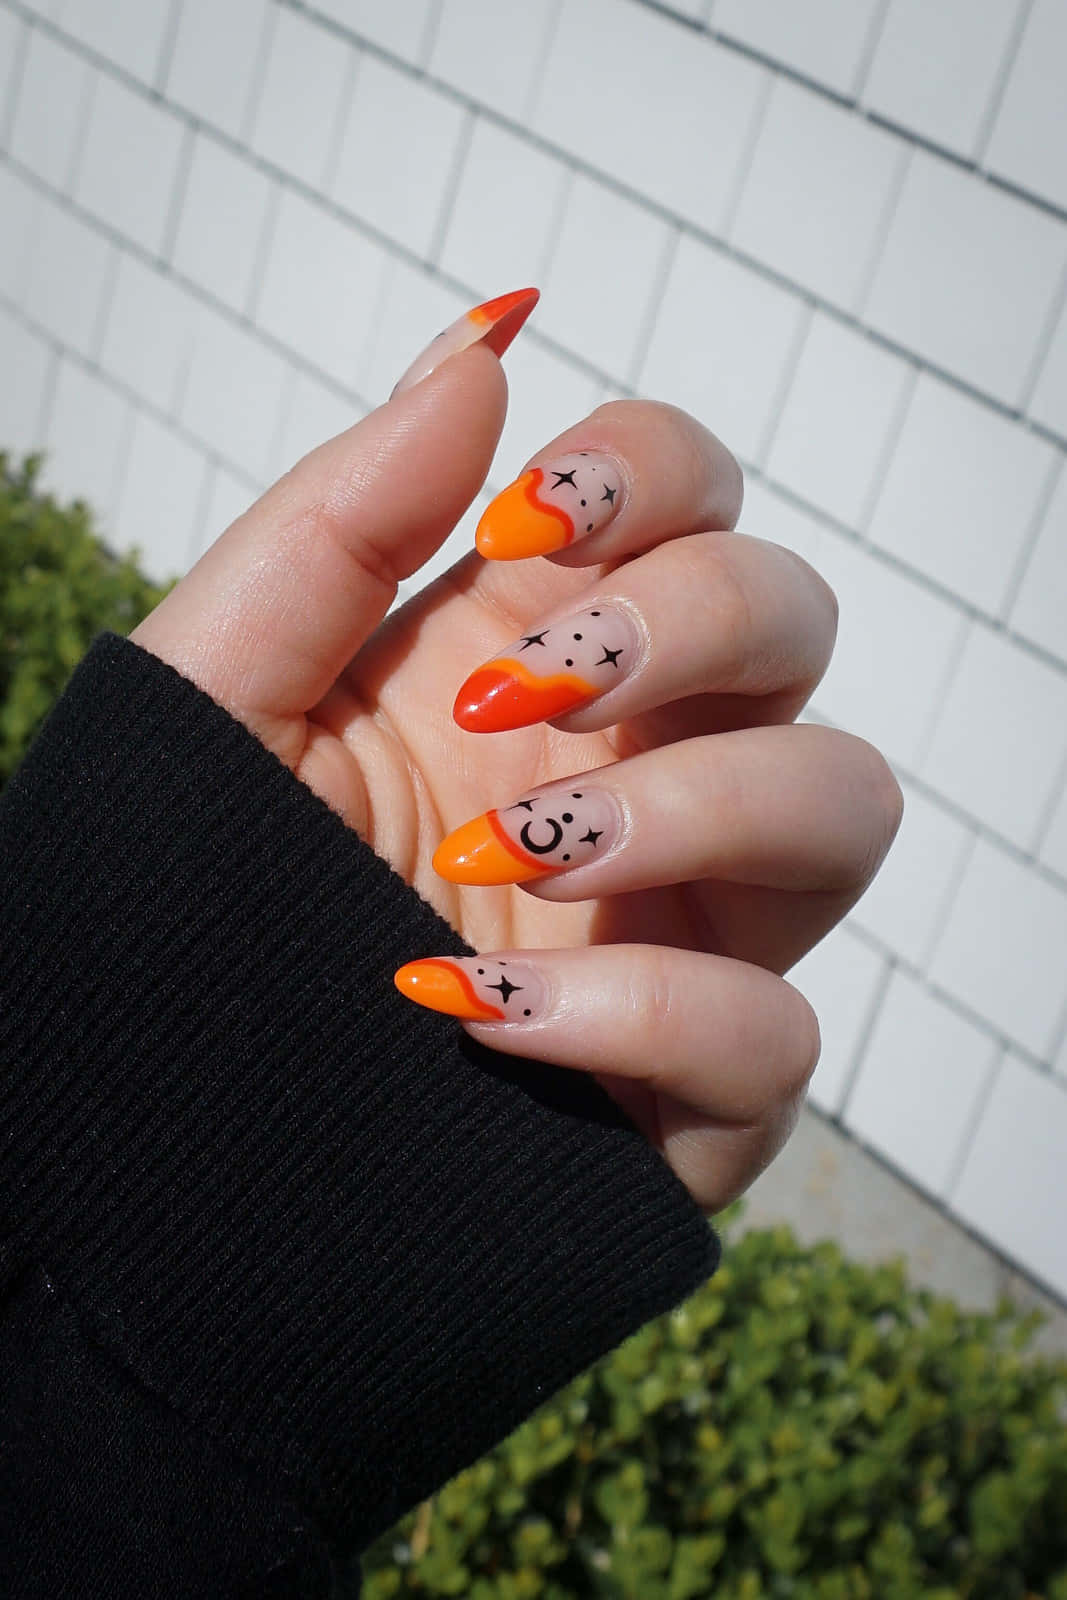 Feeling festive? Show off your spooky style with Halloween nail art! Wallpaper